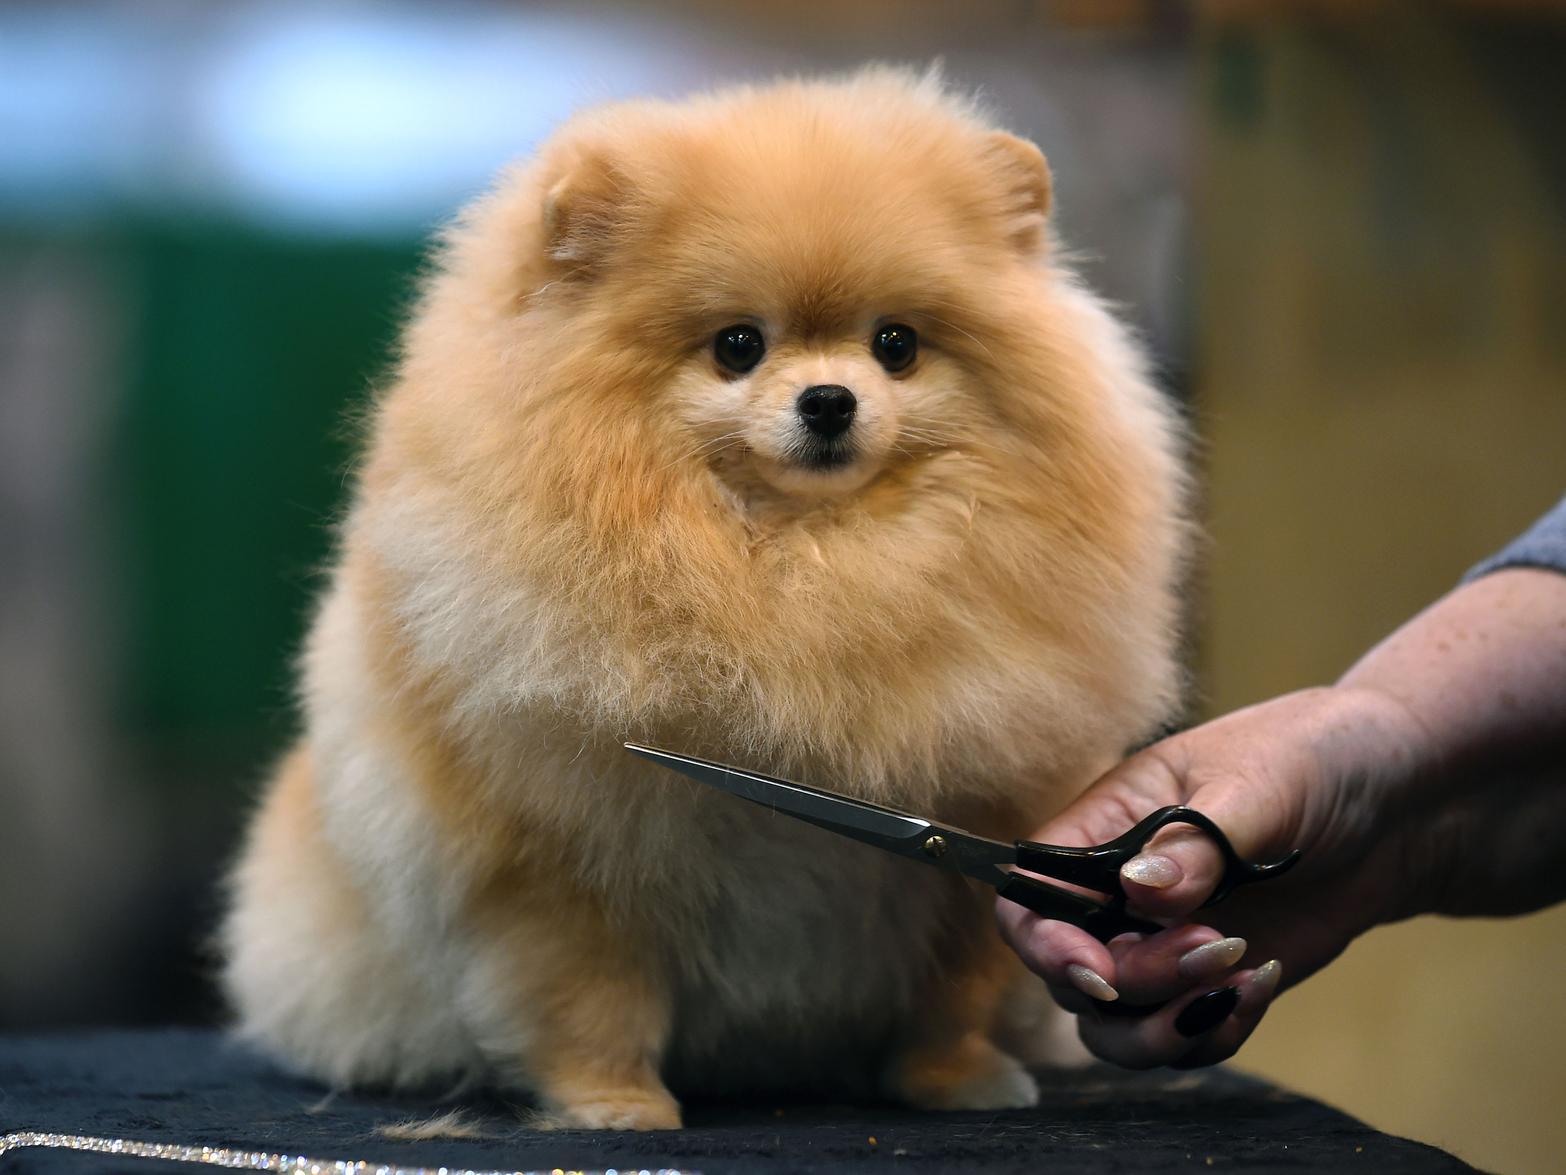 Two Pomeranian dogs were stolen in 2019, according to police figures.